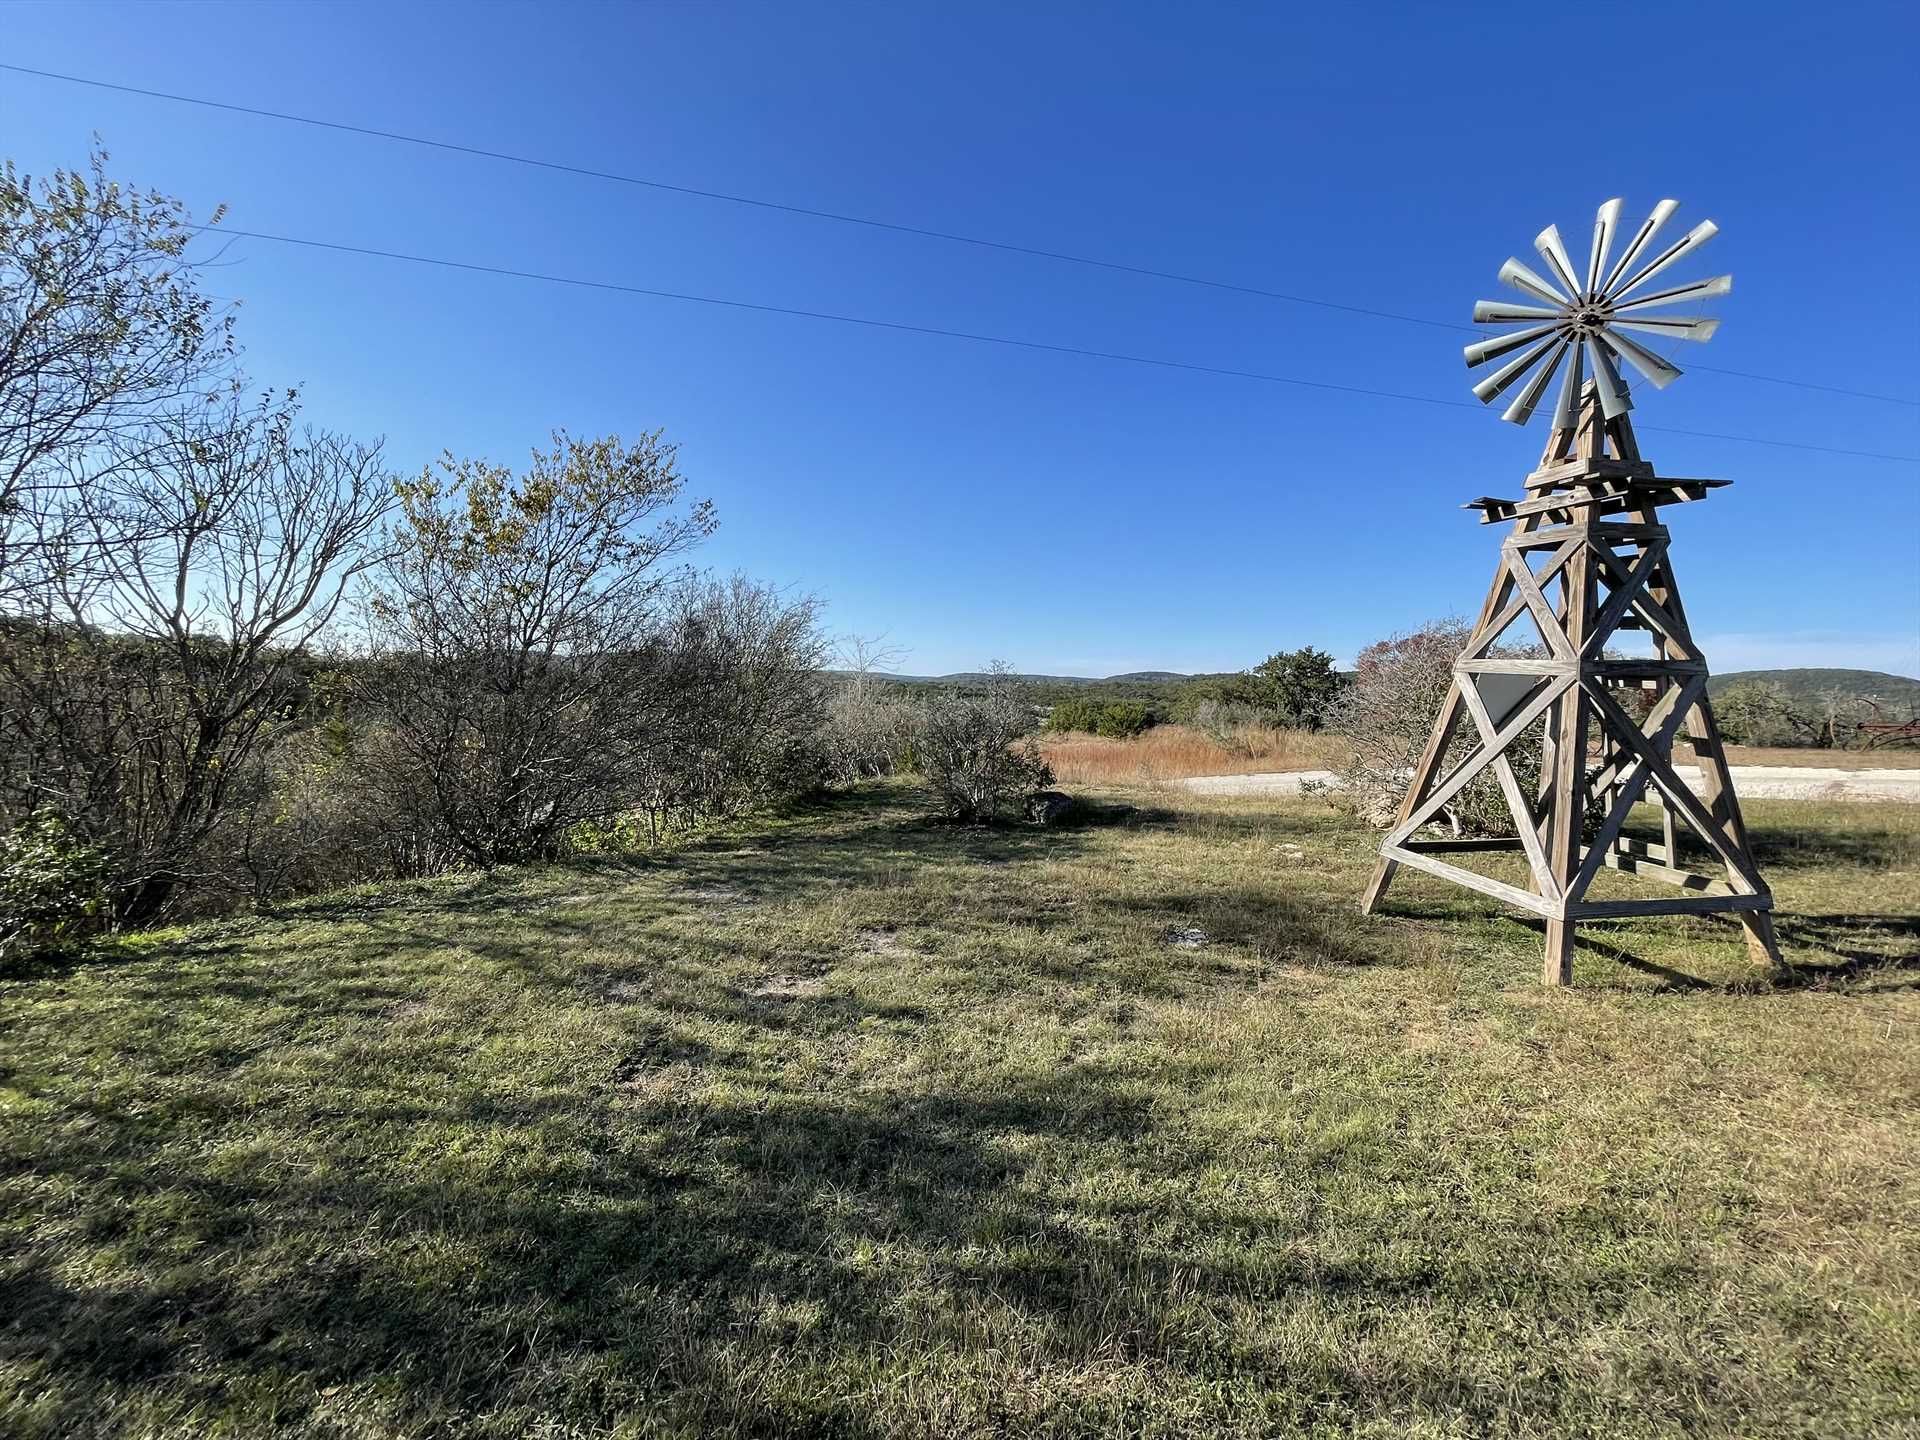                                                 The West 1077 Guest Ranch is 230 acres in the heart of the Hill Country, with the enormous Hill Country State Natural Area right next door!